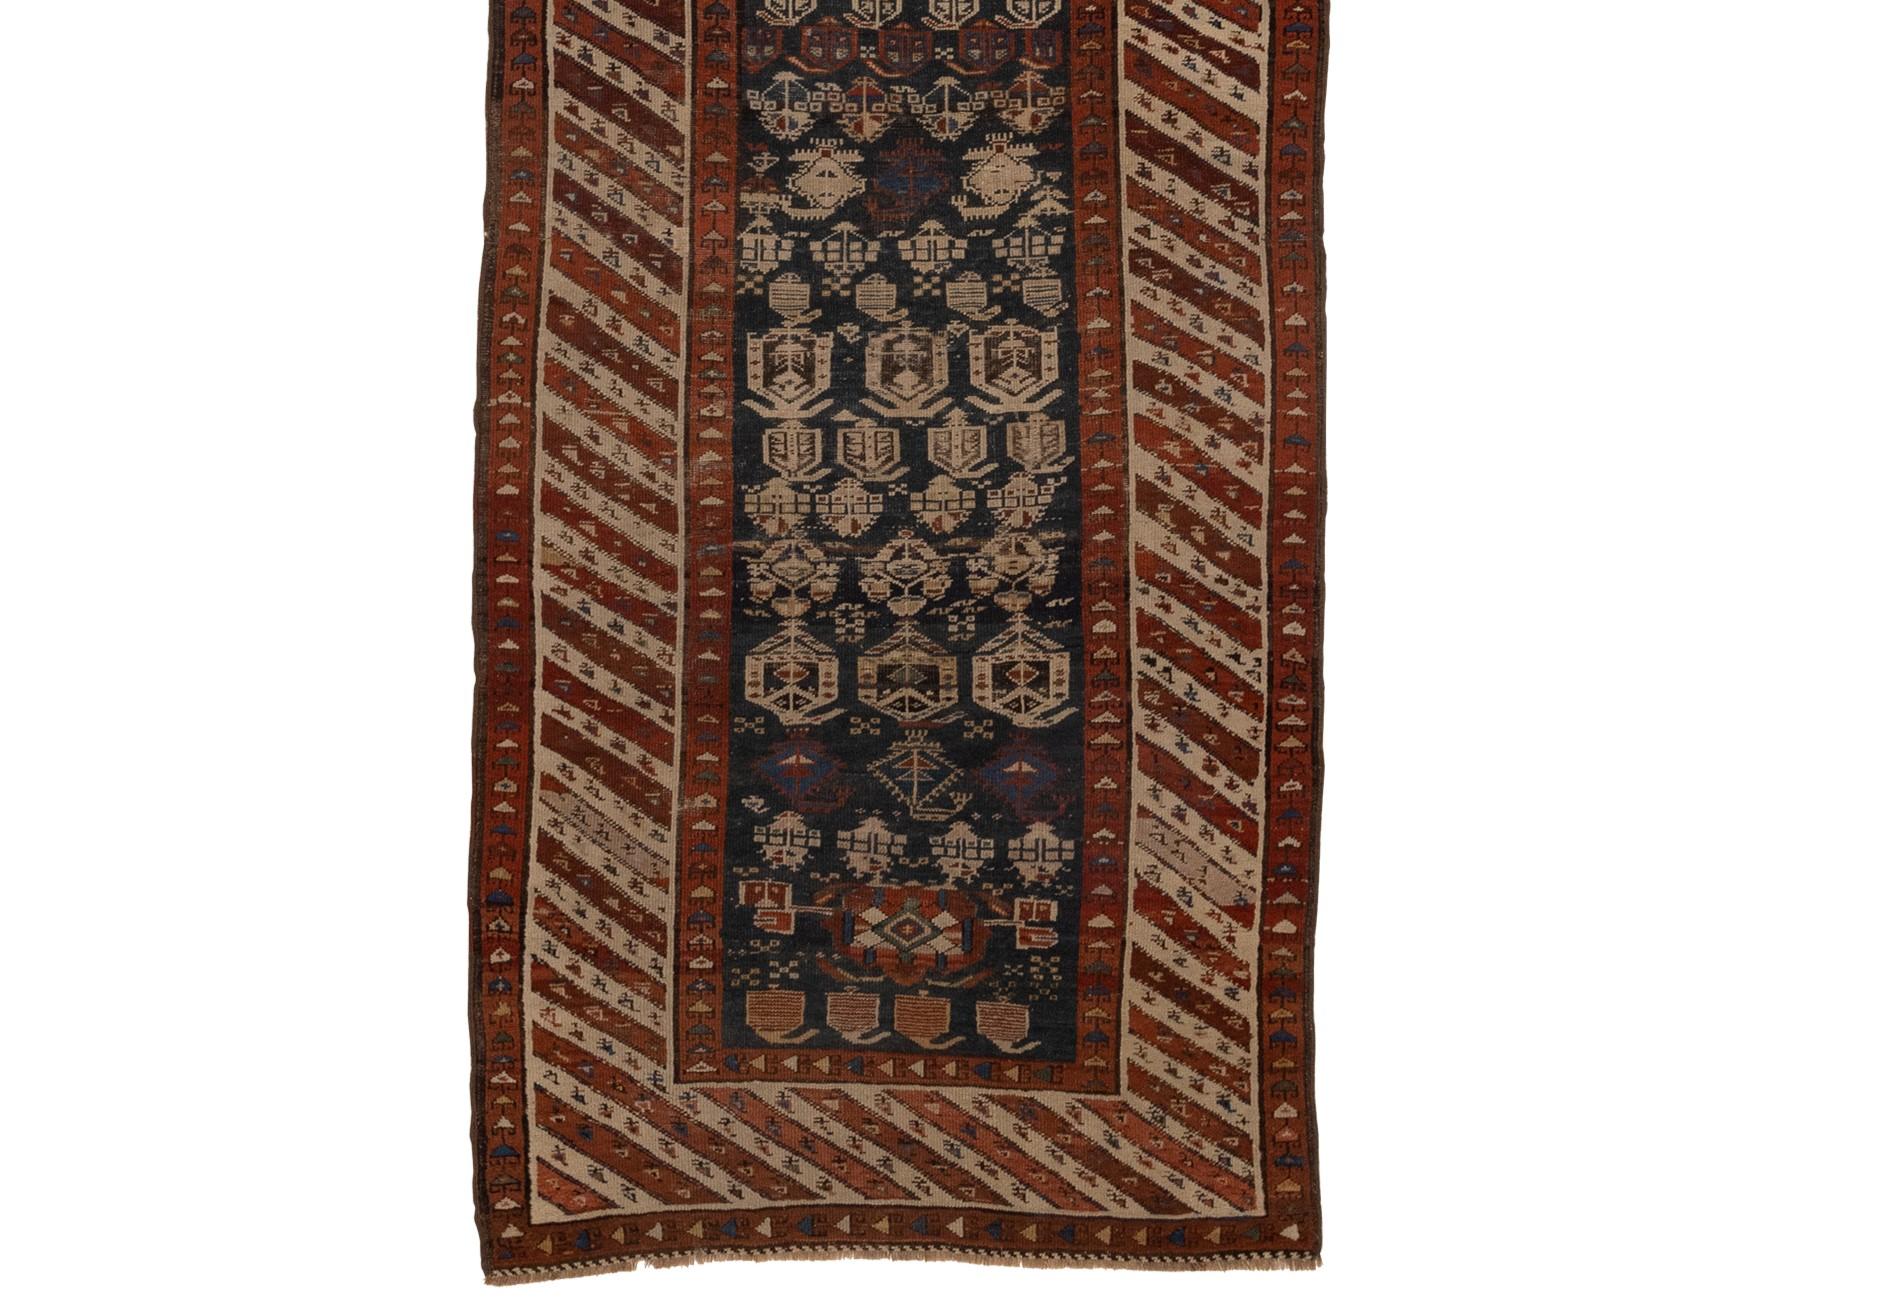 This antique Kurdish runner dating back to the 1900s is truly impressive. The piece boasts a breathtaking design that is utterly dominated by striking geometric patterns set against a rich blue and red field. Adding to its charm are a number of